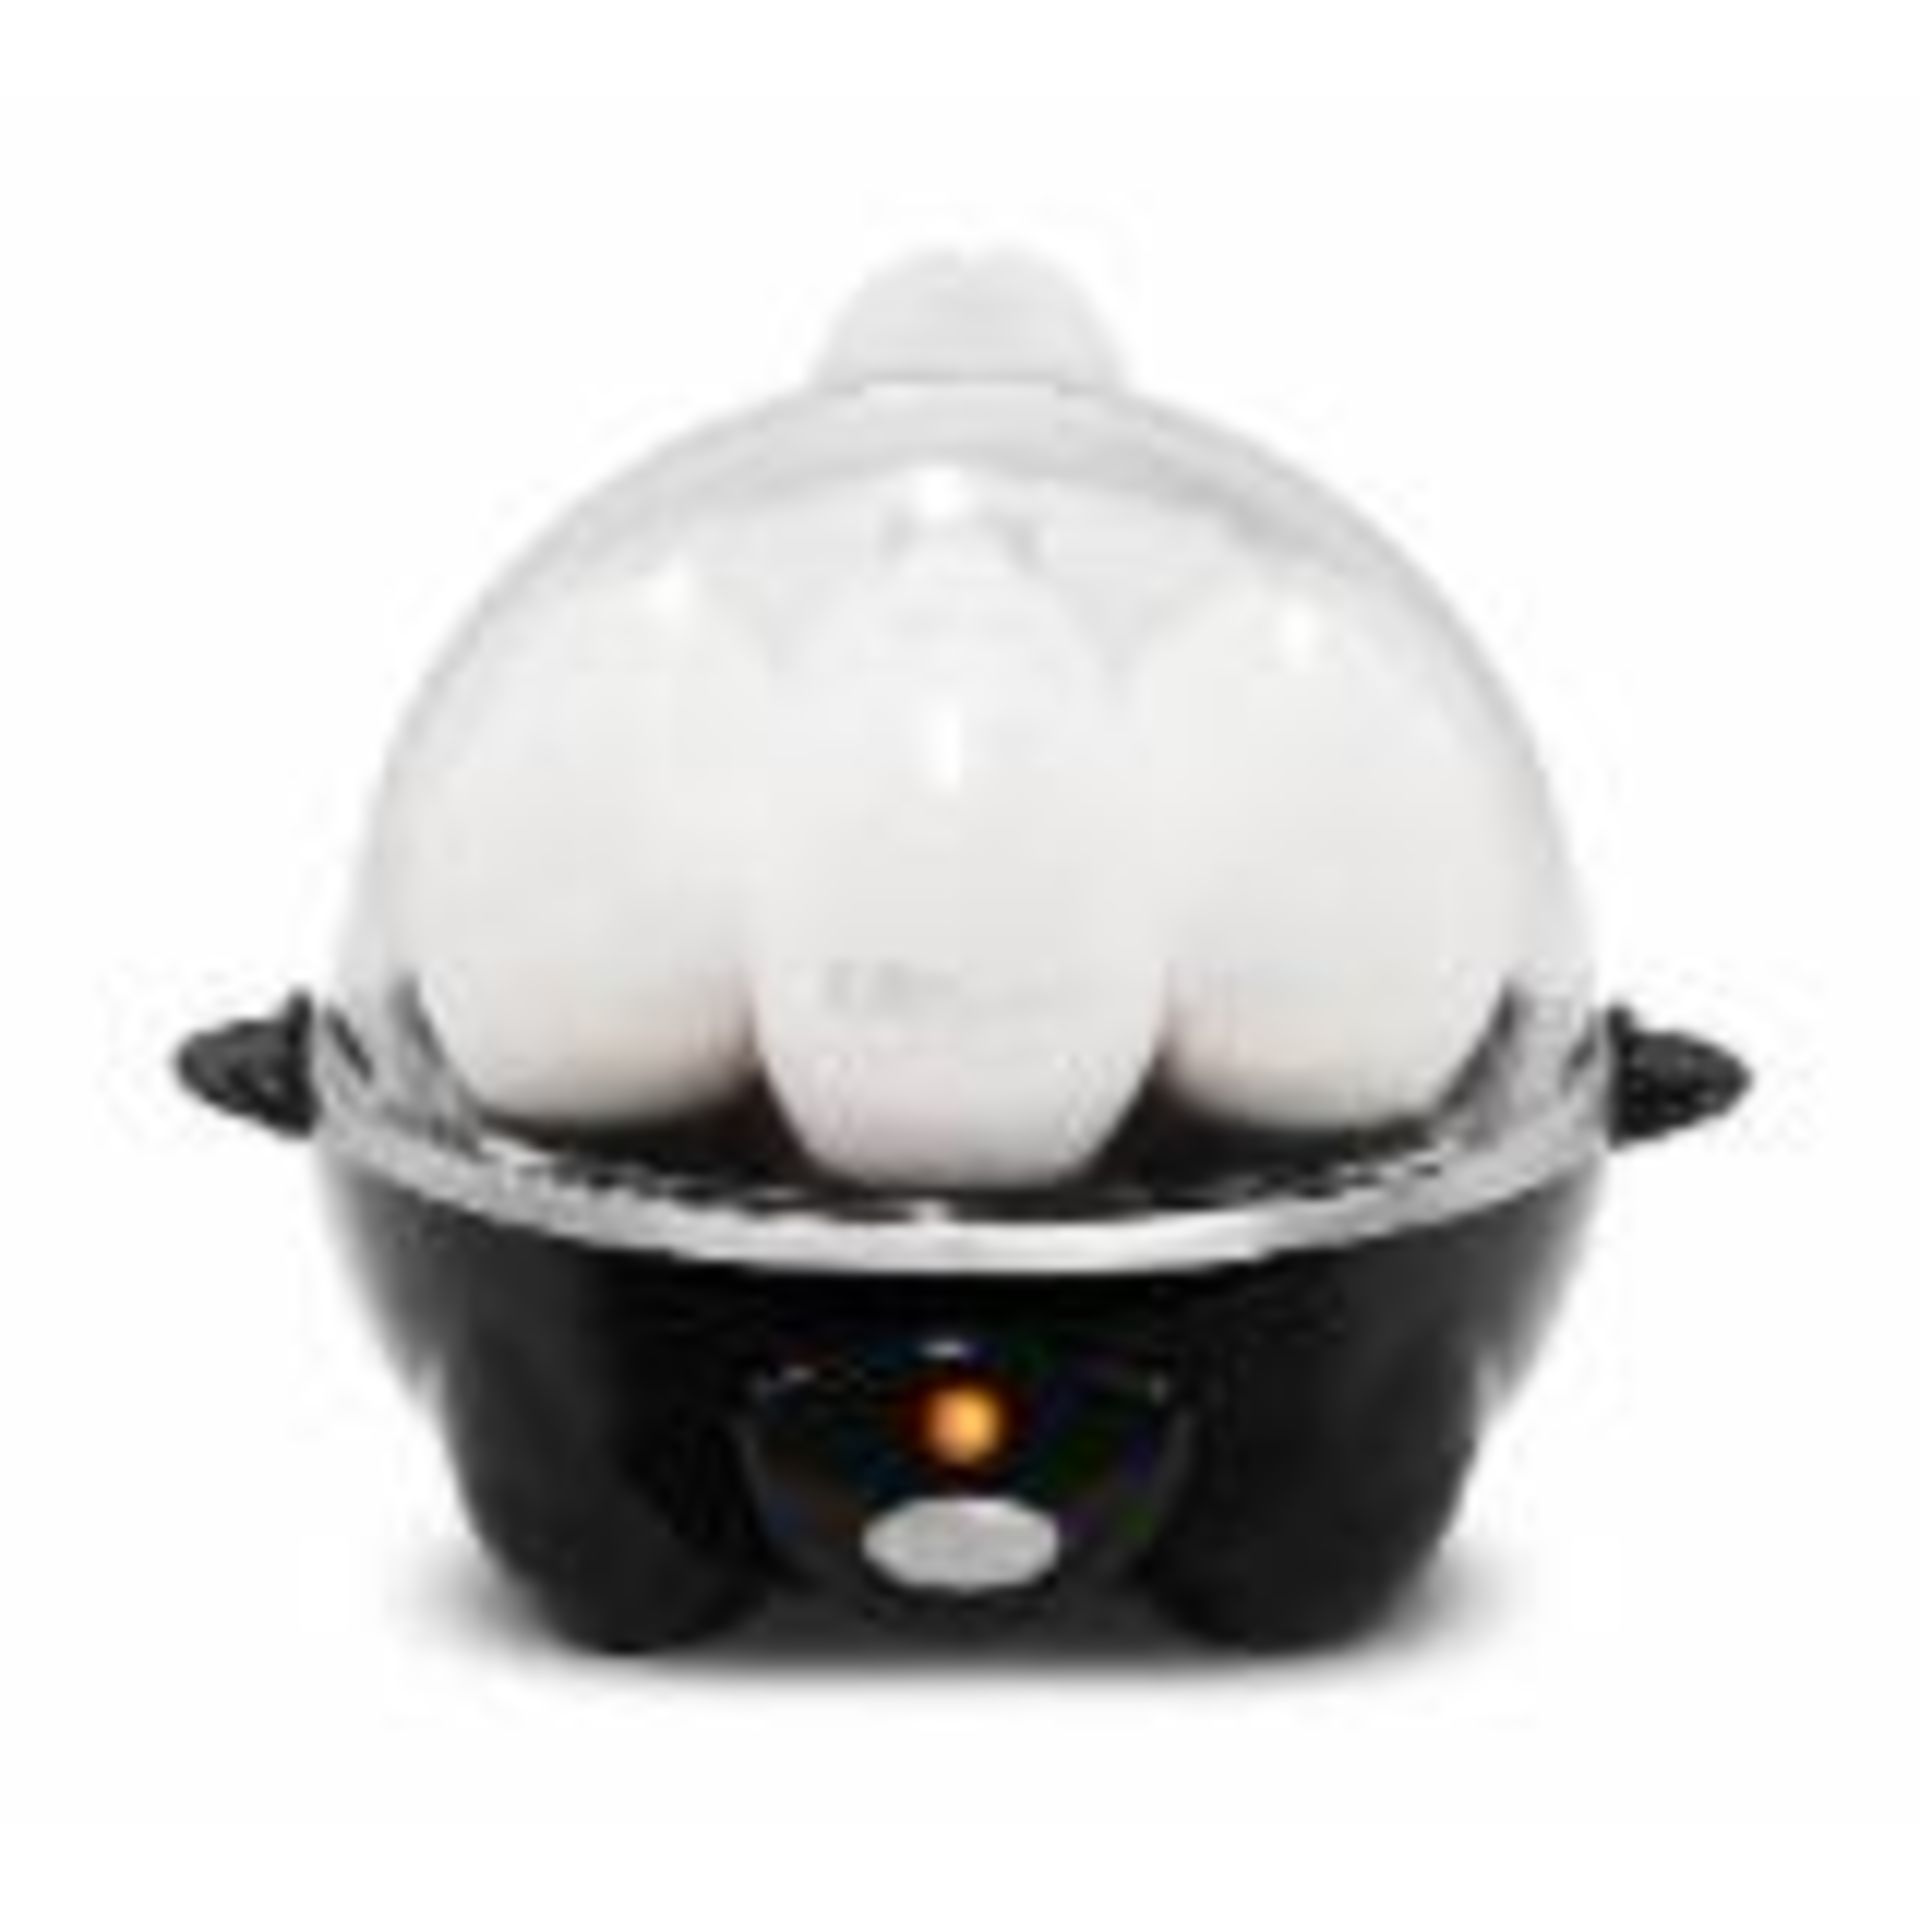 V Brand New Egg Cooker with Buzzer and Removable Egg Steaming Shelf - Boil up to 7 eggs at once (